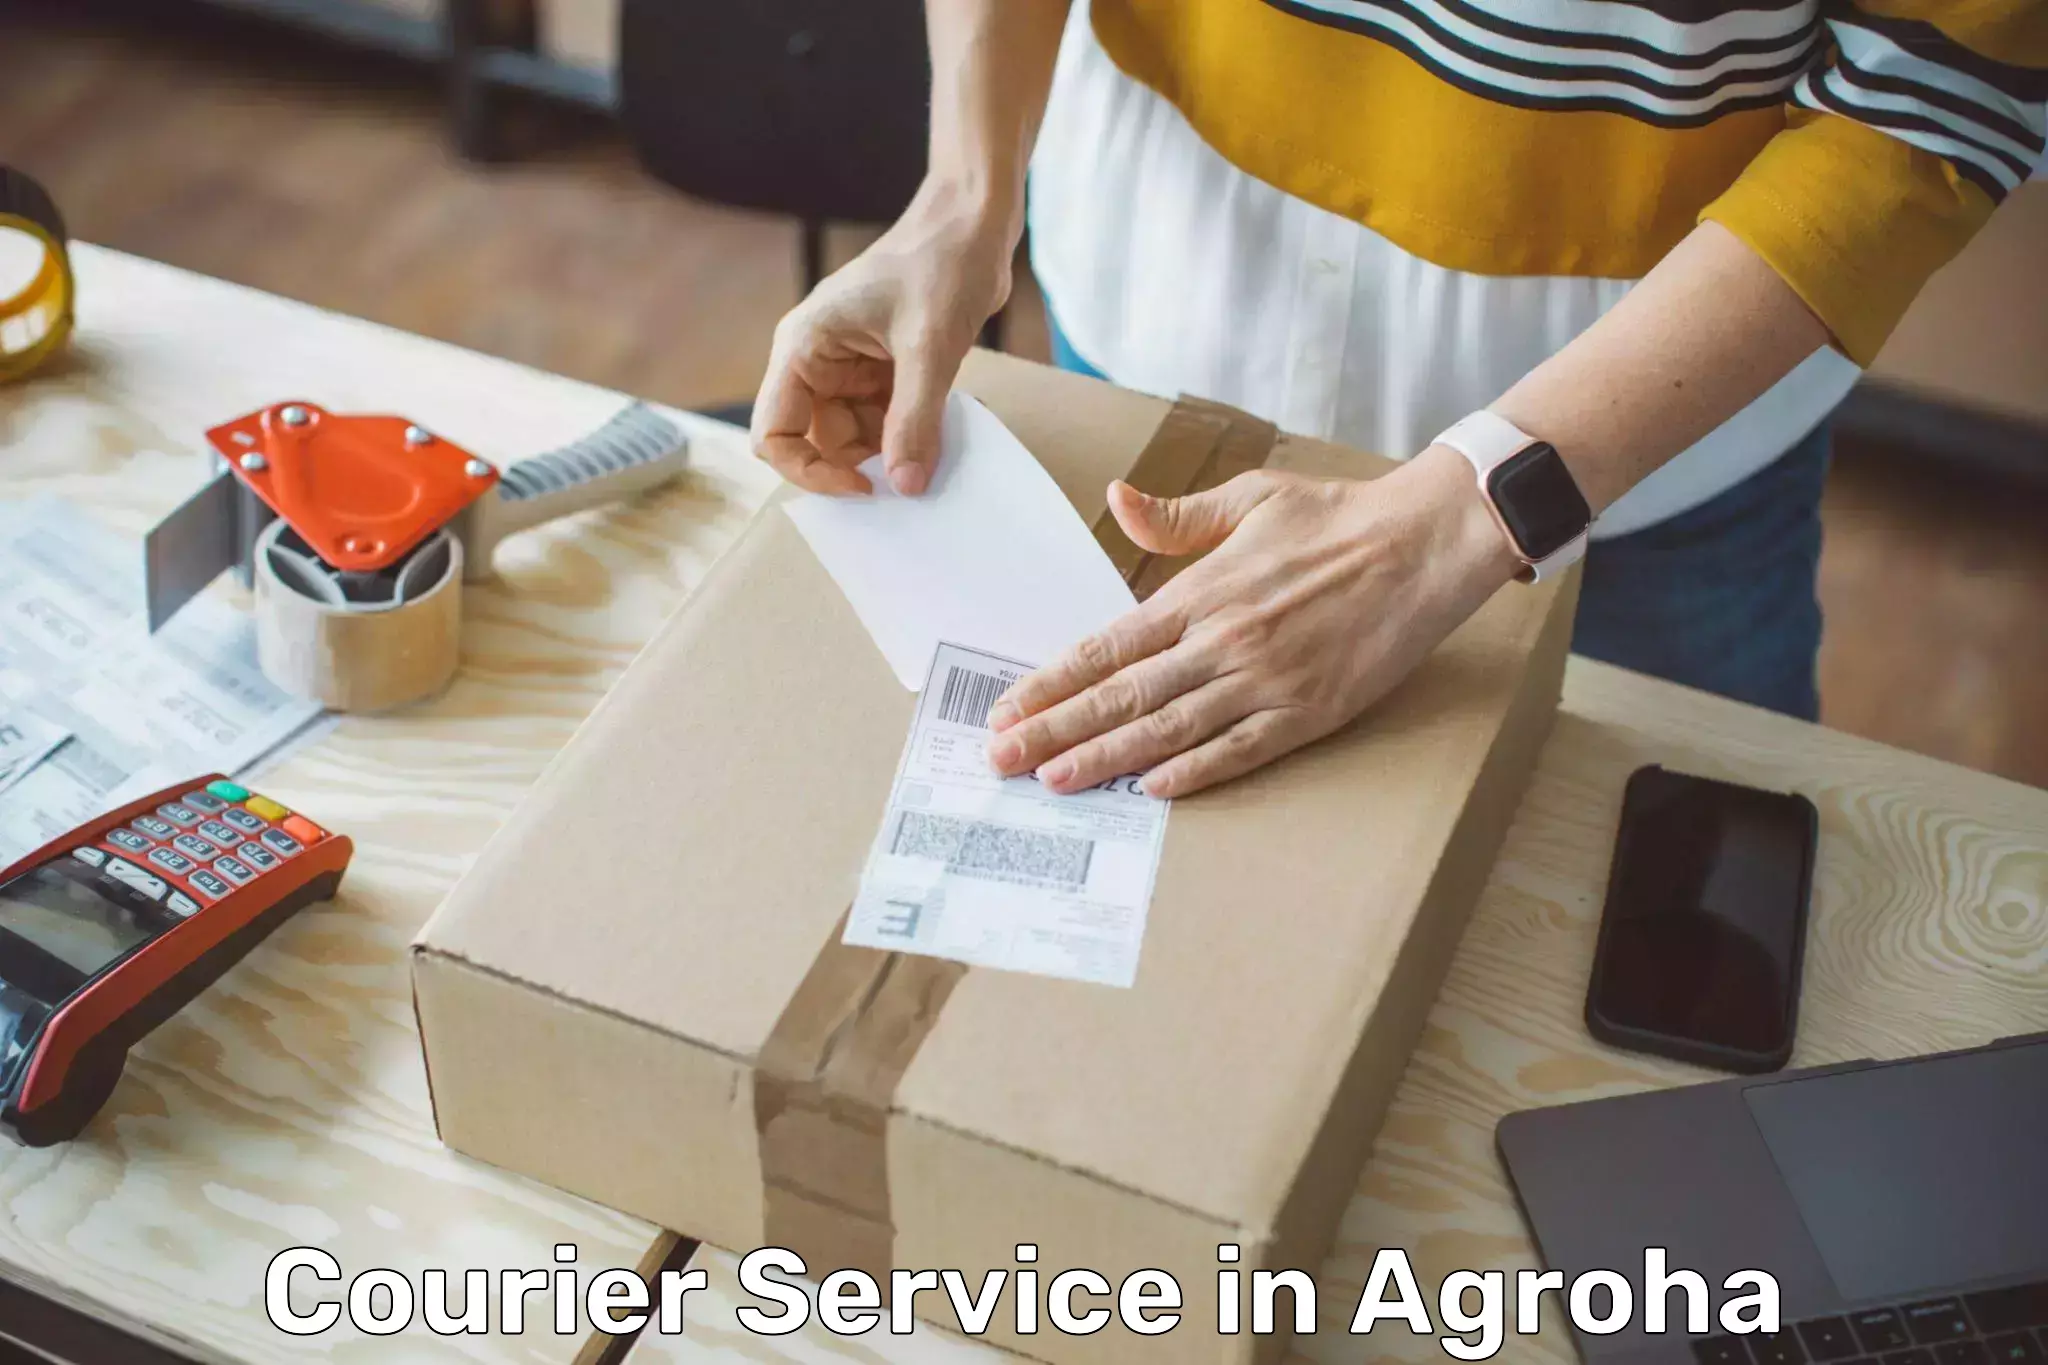 Courier rate comparison in Agroha